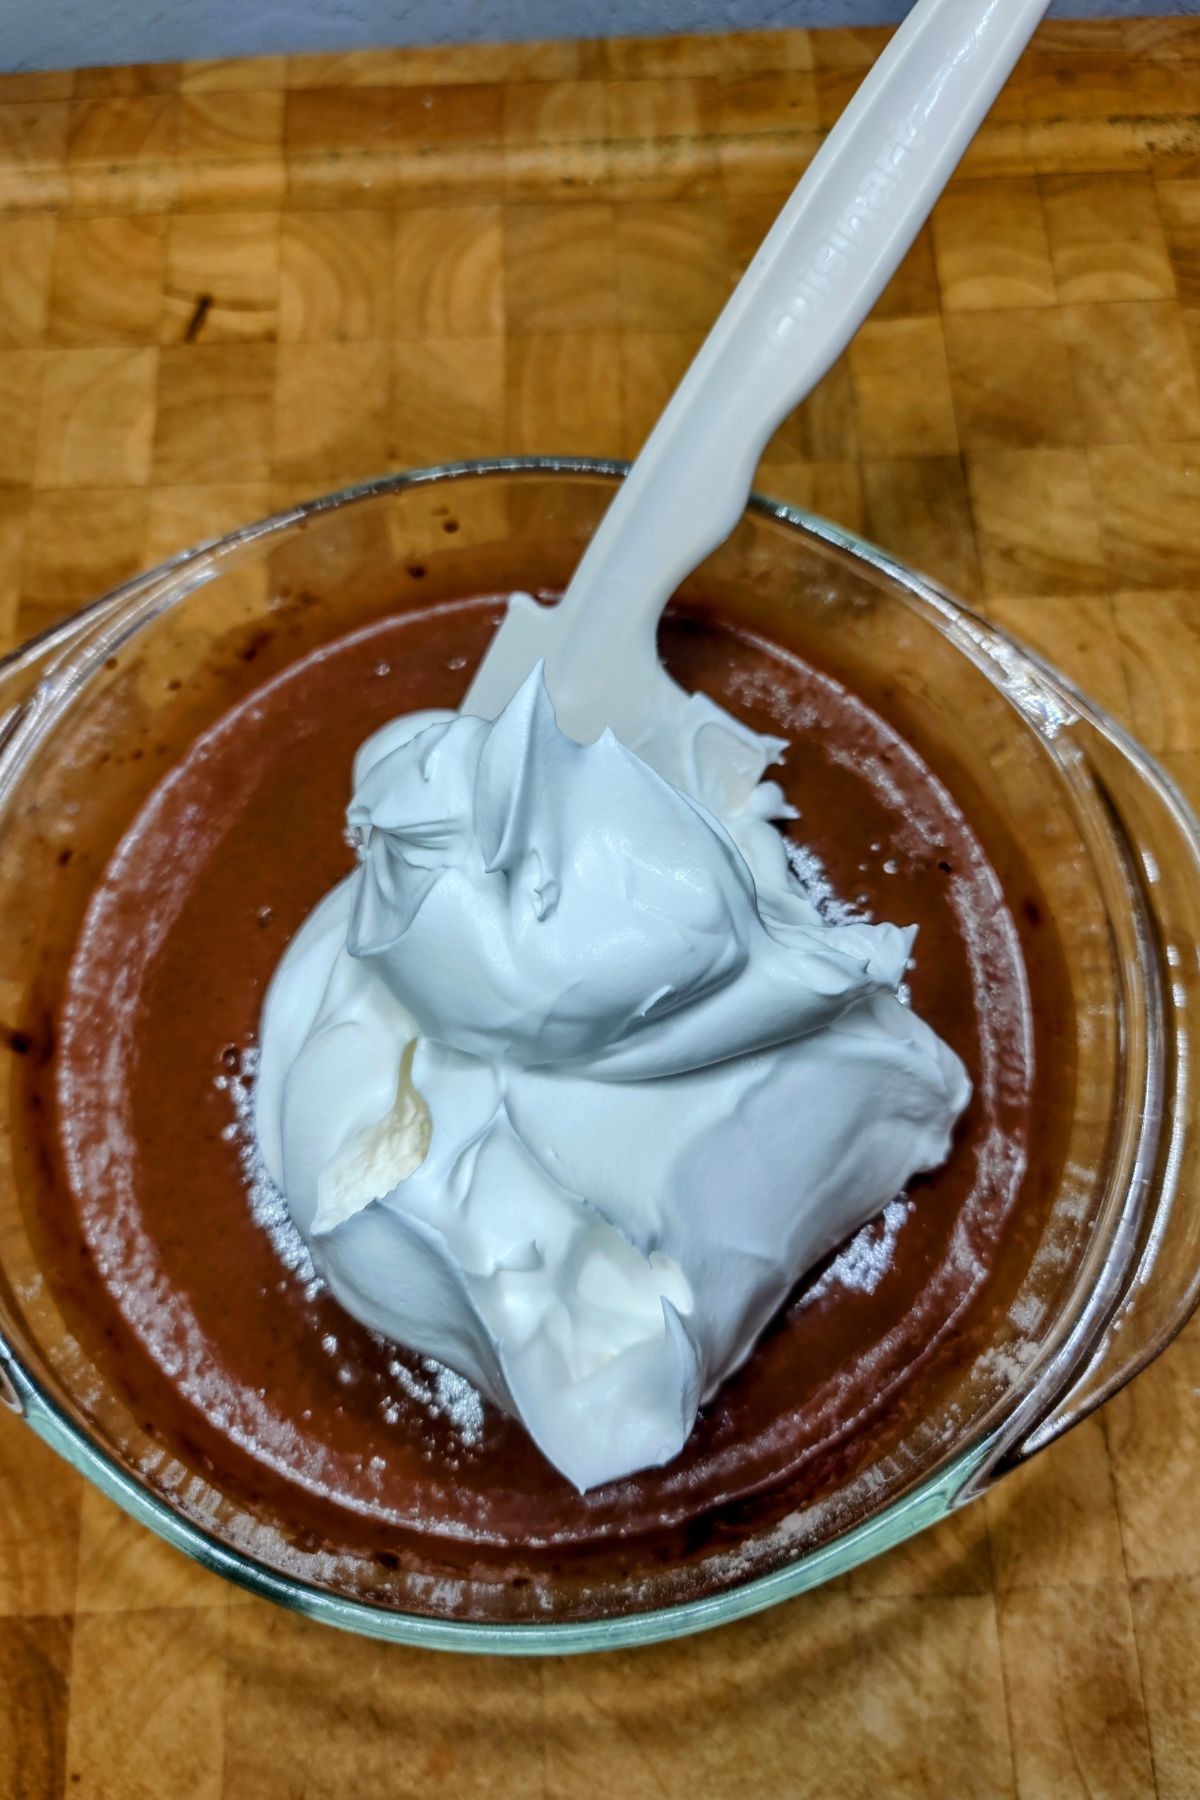 Adding whipped topping to chocolate pudding in a mixing bowl.